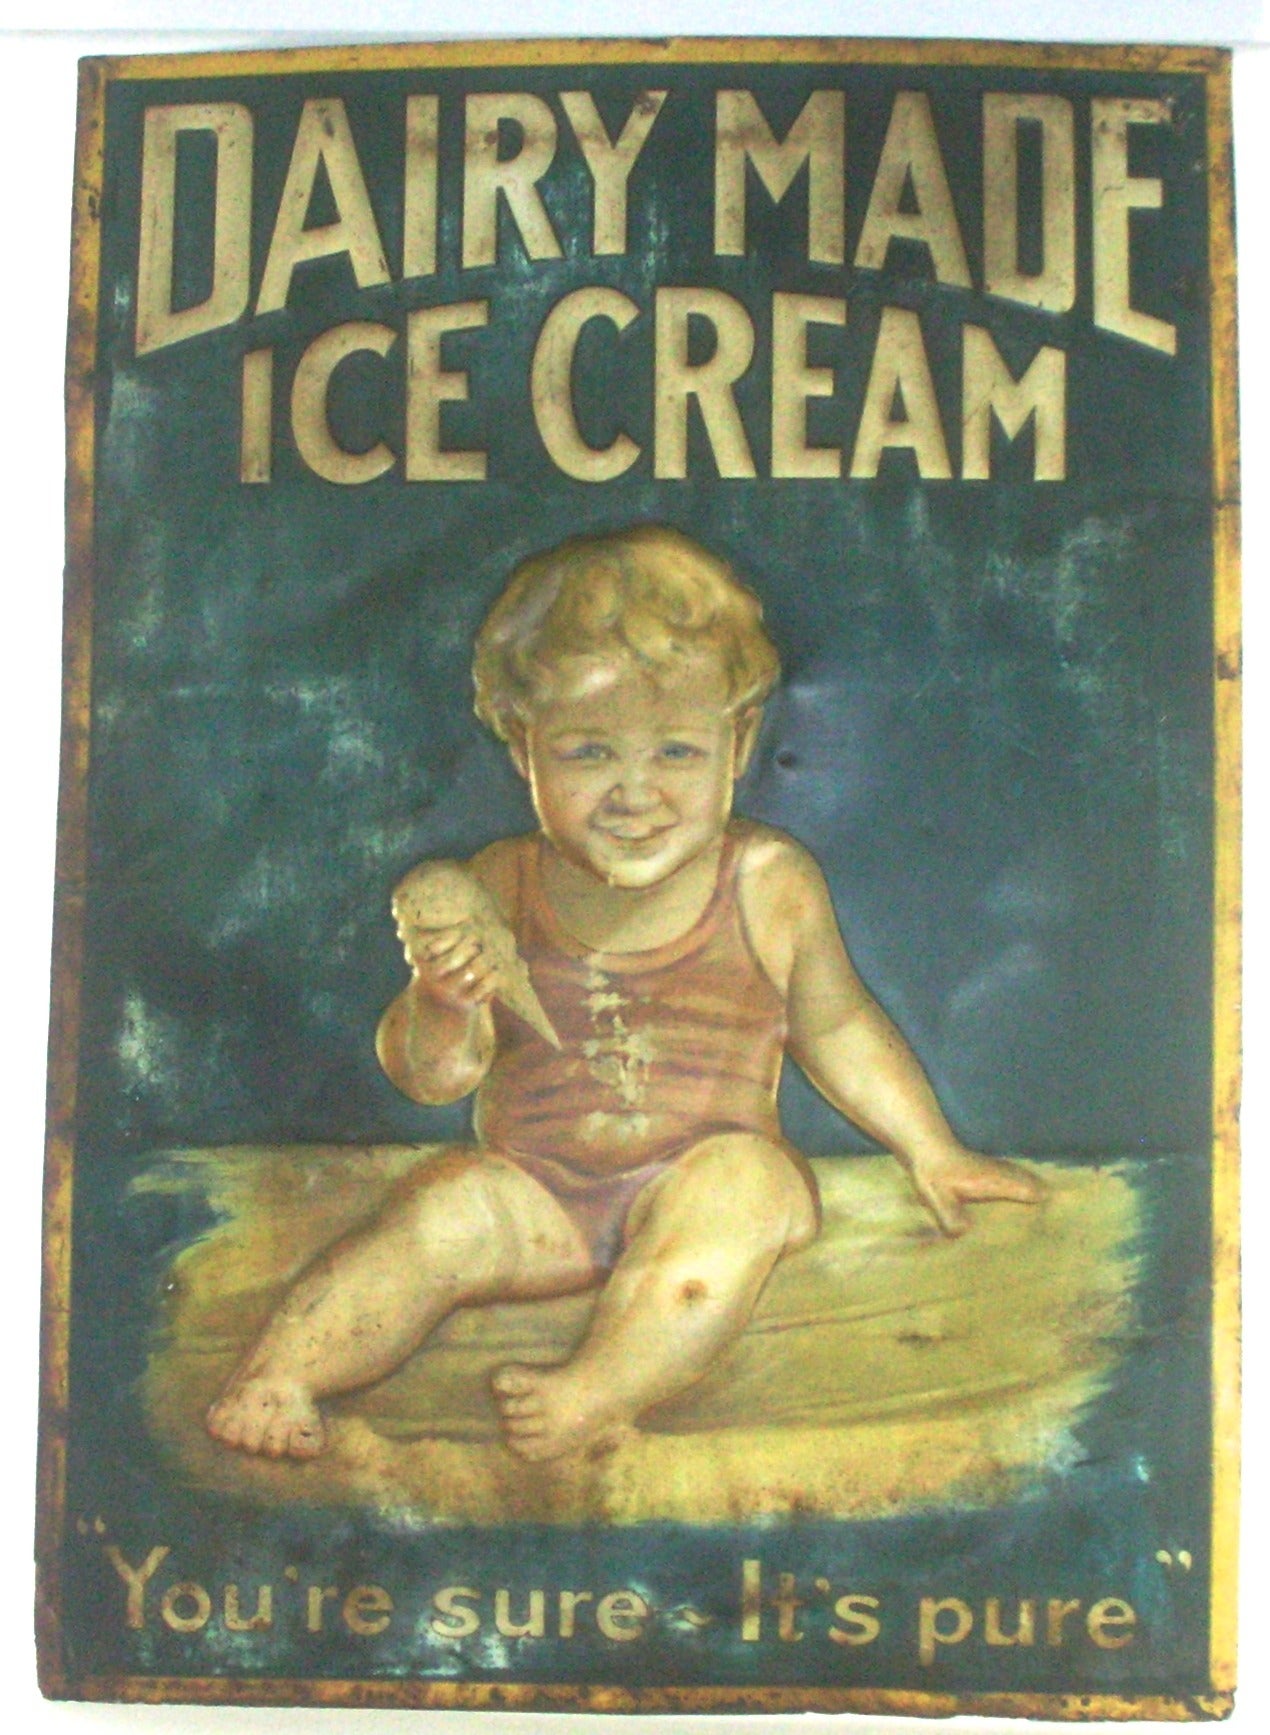 A wonderful lithograph on tin, embossed American vintage advertising sign. The sign is not often seen and is a charming design showing a blonde haired, blue eyed smiling baby holding and enjoying an ice cream cone. The Sub-script claims 